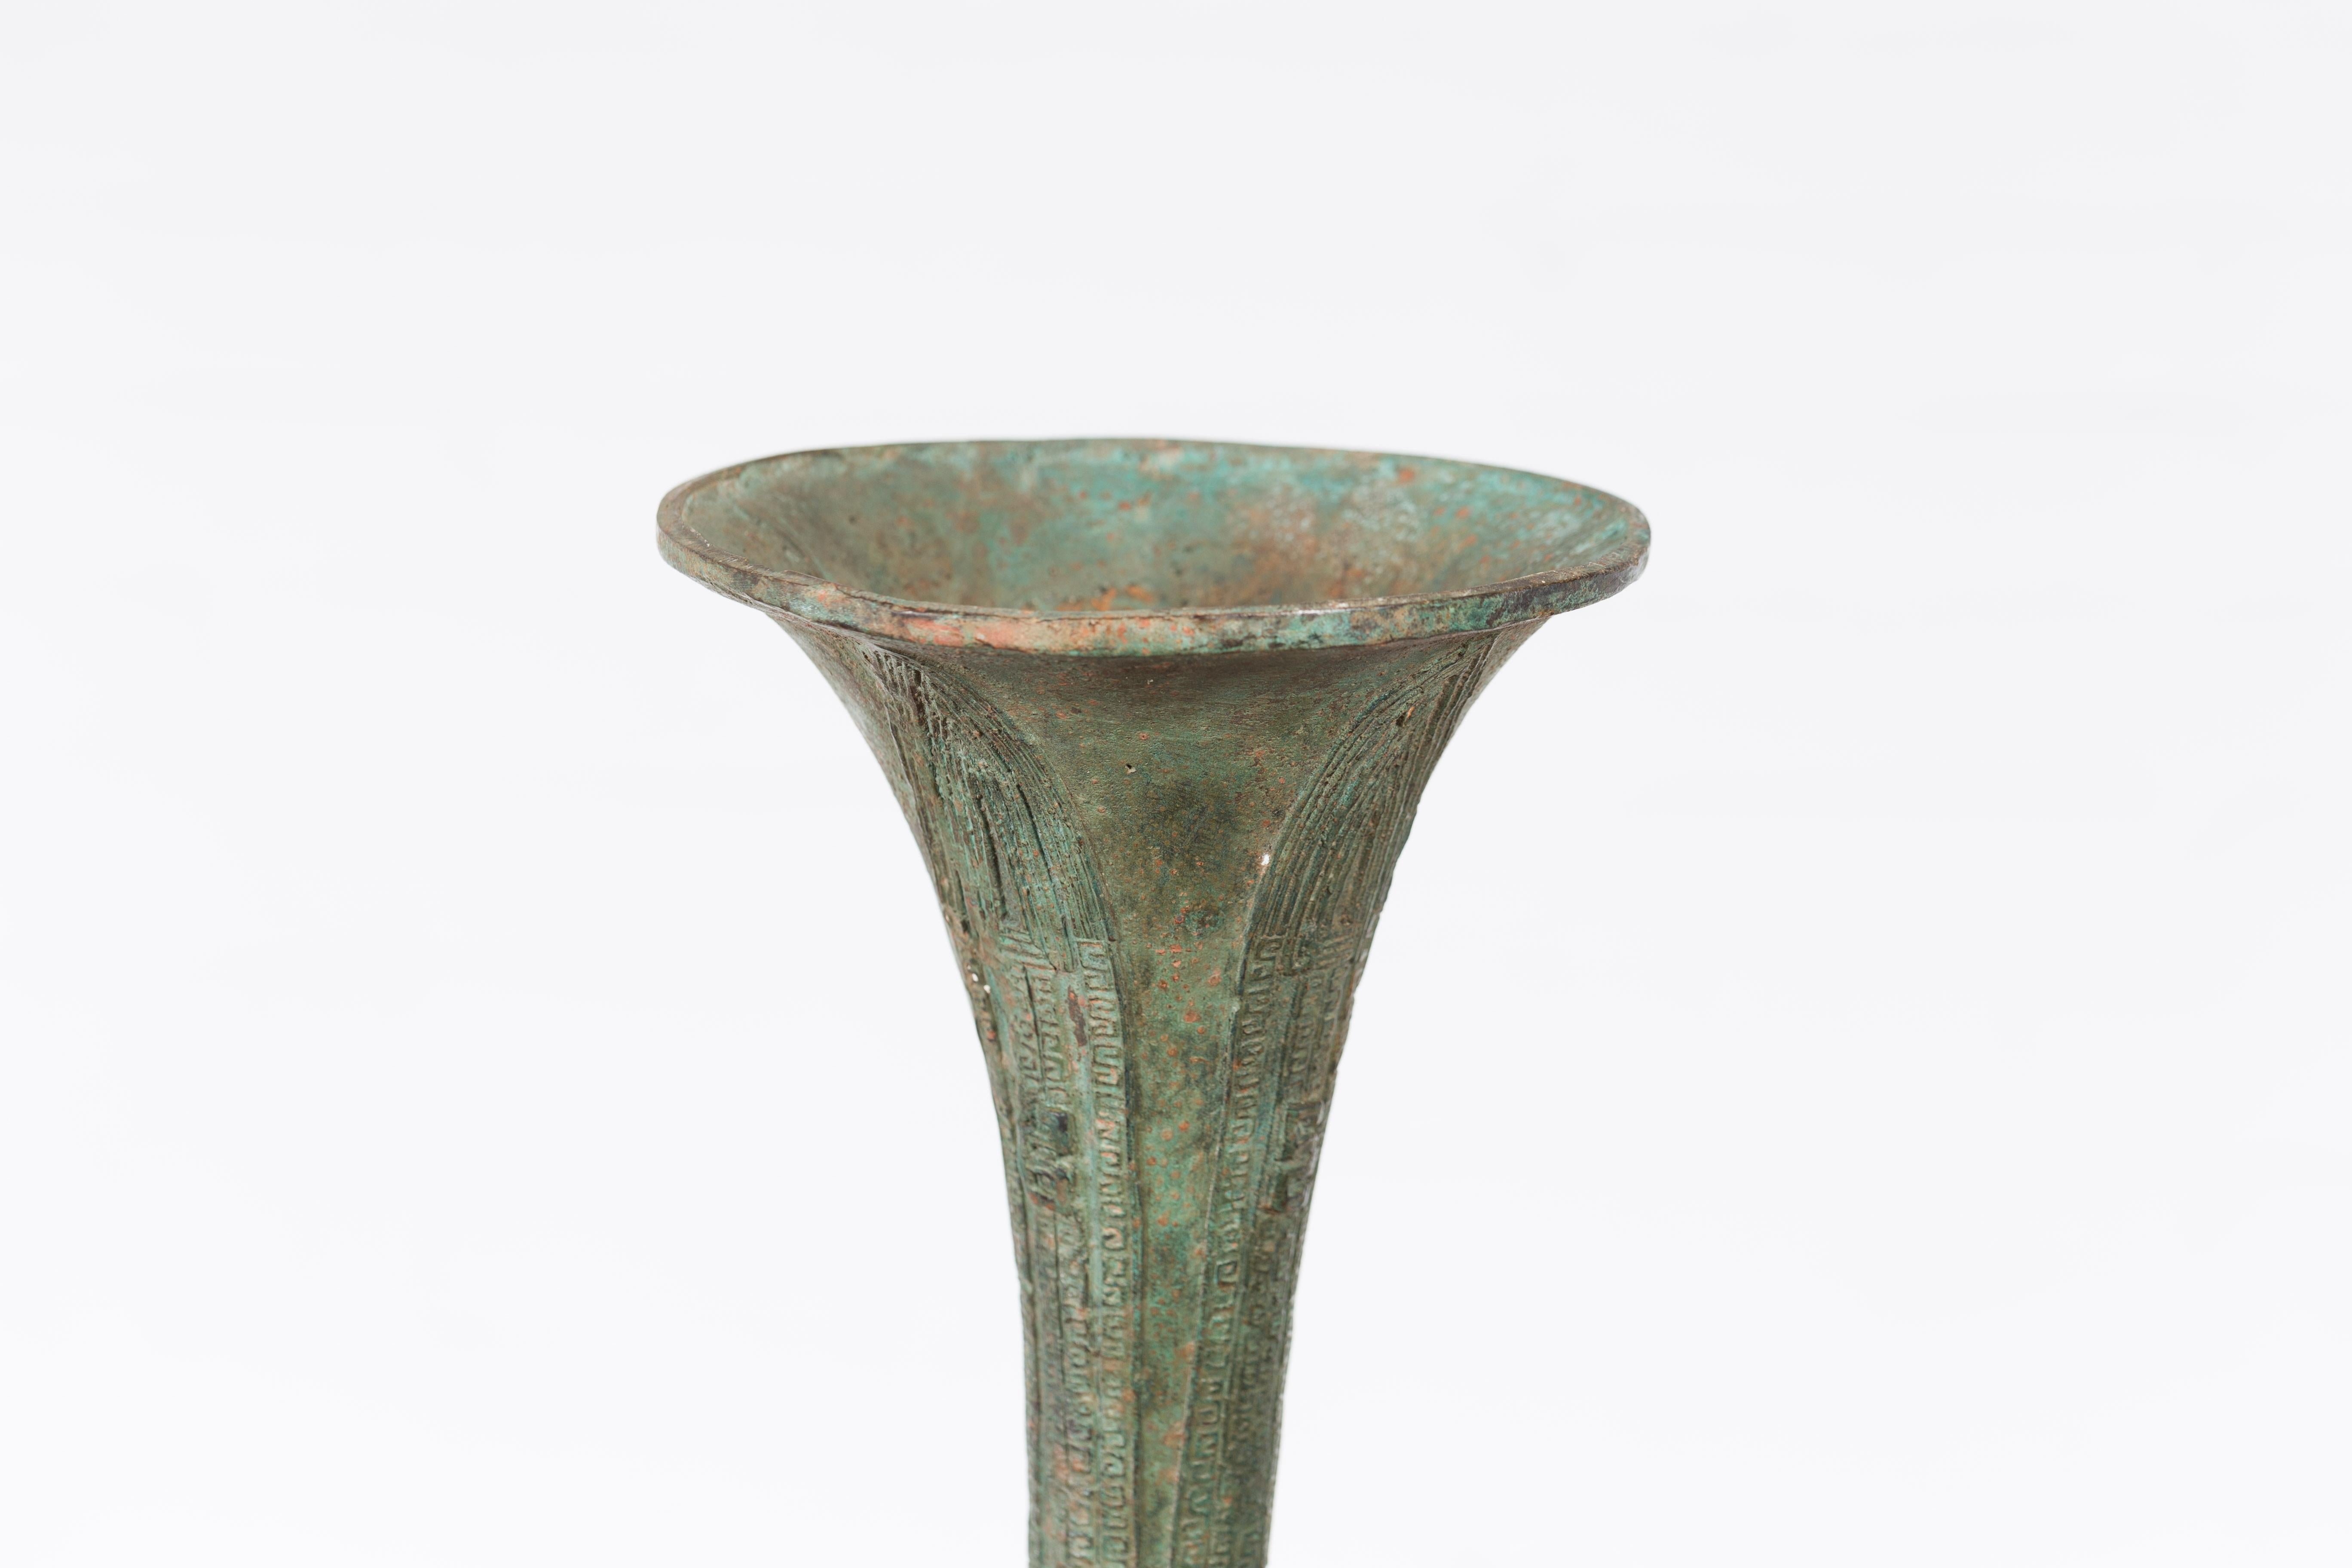 Bronze Flute Shaped Han Dynasty Ceremonial Vessel In Good Condition For Sale In Yonkers, NY